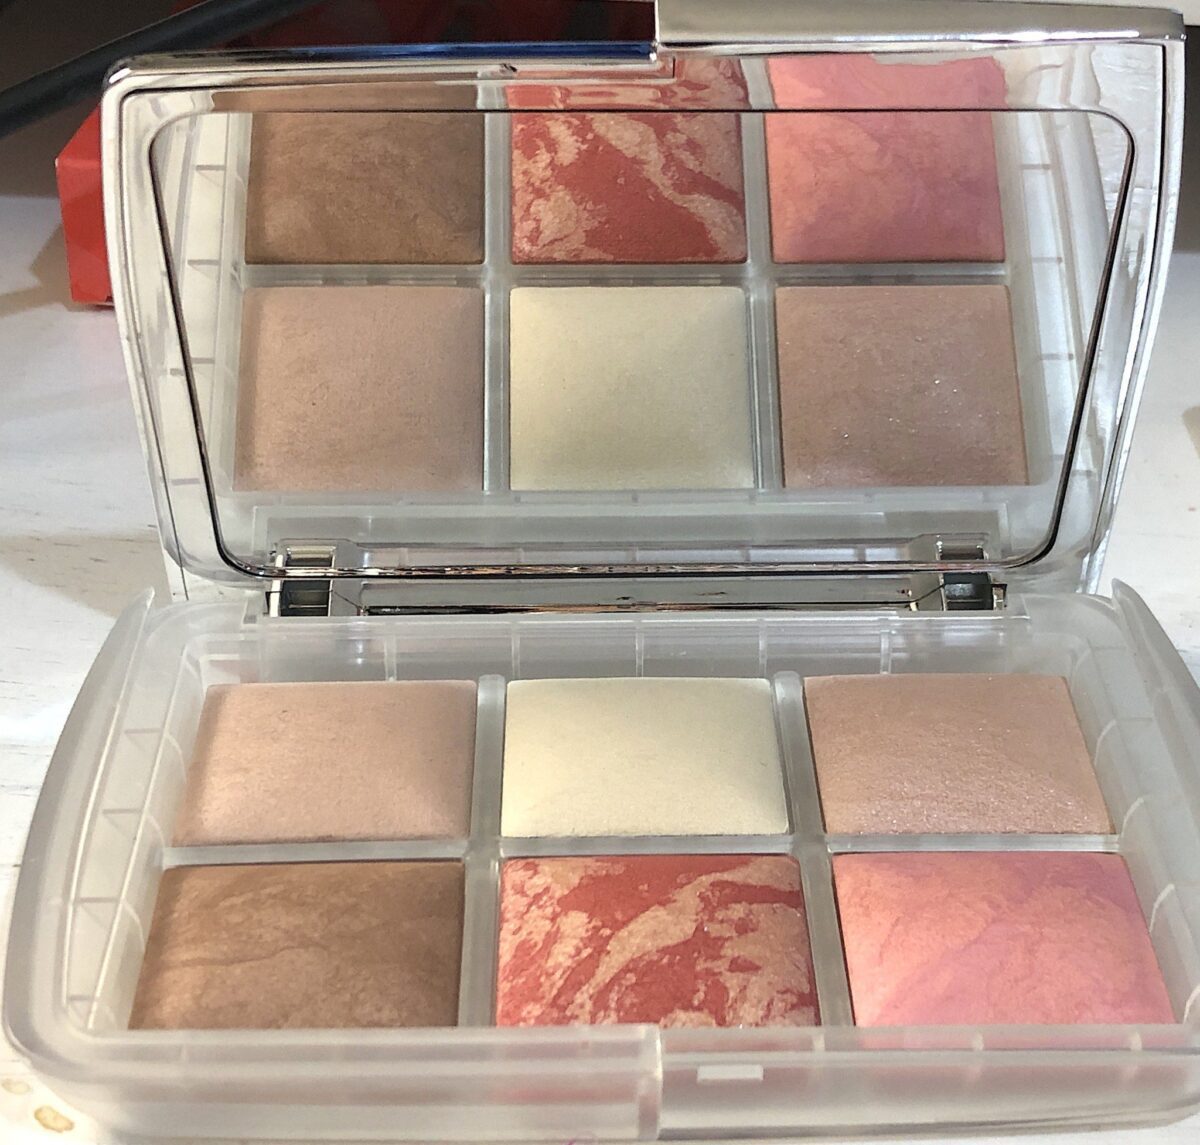 MIRROR AND POWDERS INSIDE THE AMBIENT LIGHTING EDIT GHOST PALETTE